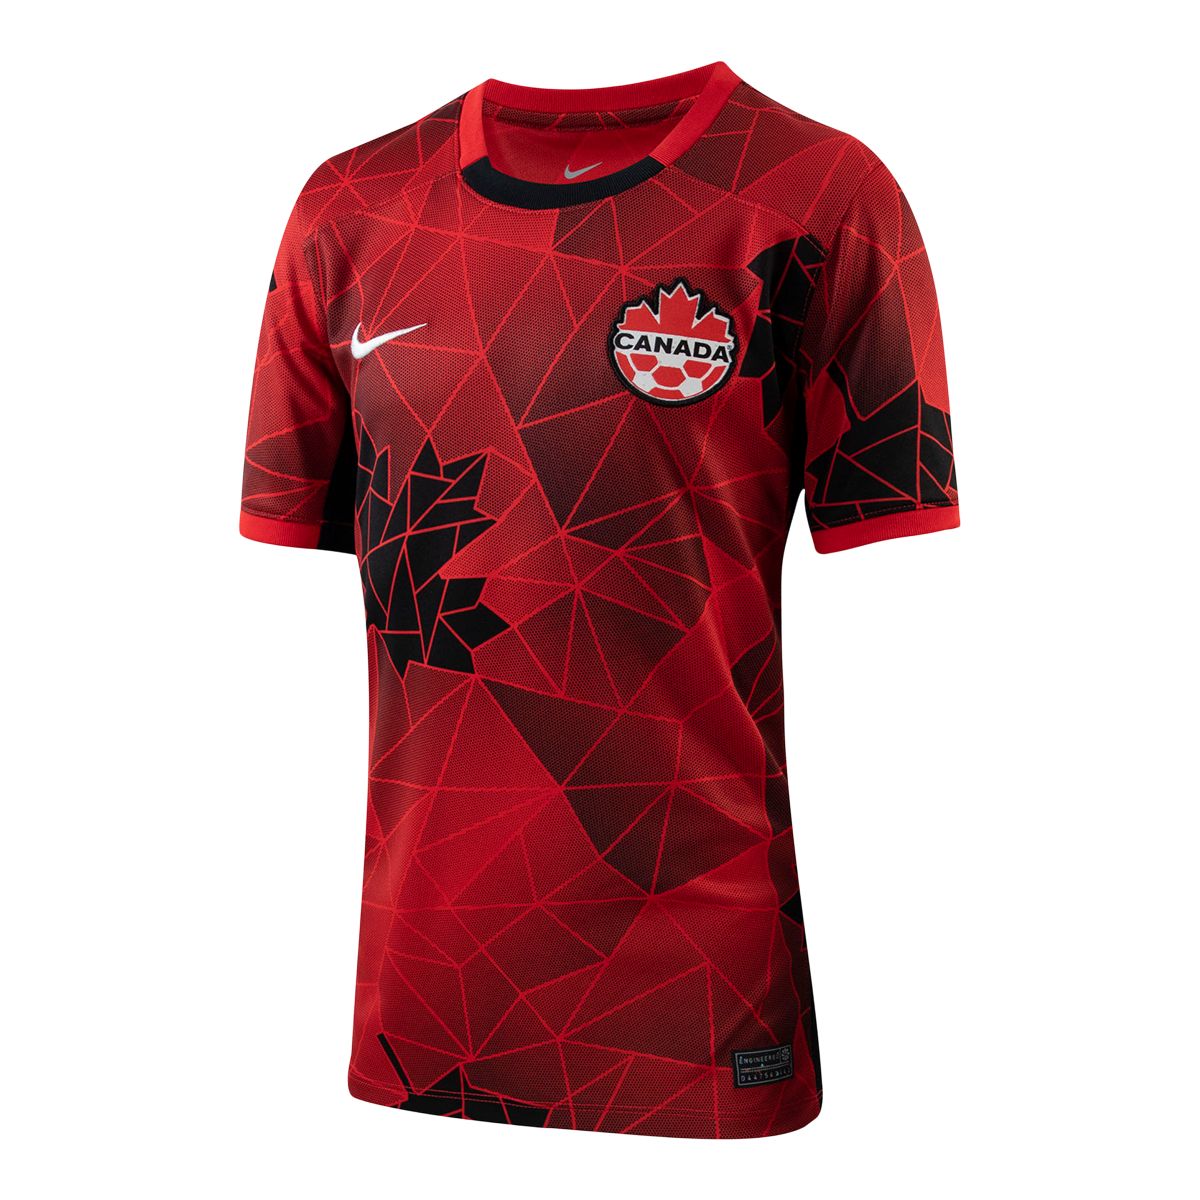 Image of Canada Nike Youth Soccer Replica Jersey